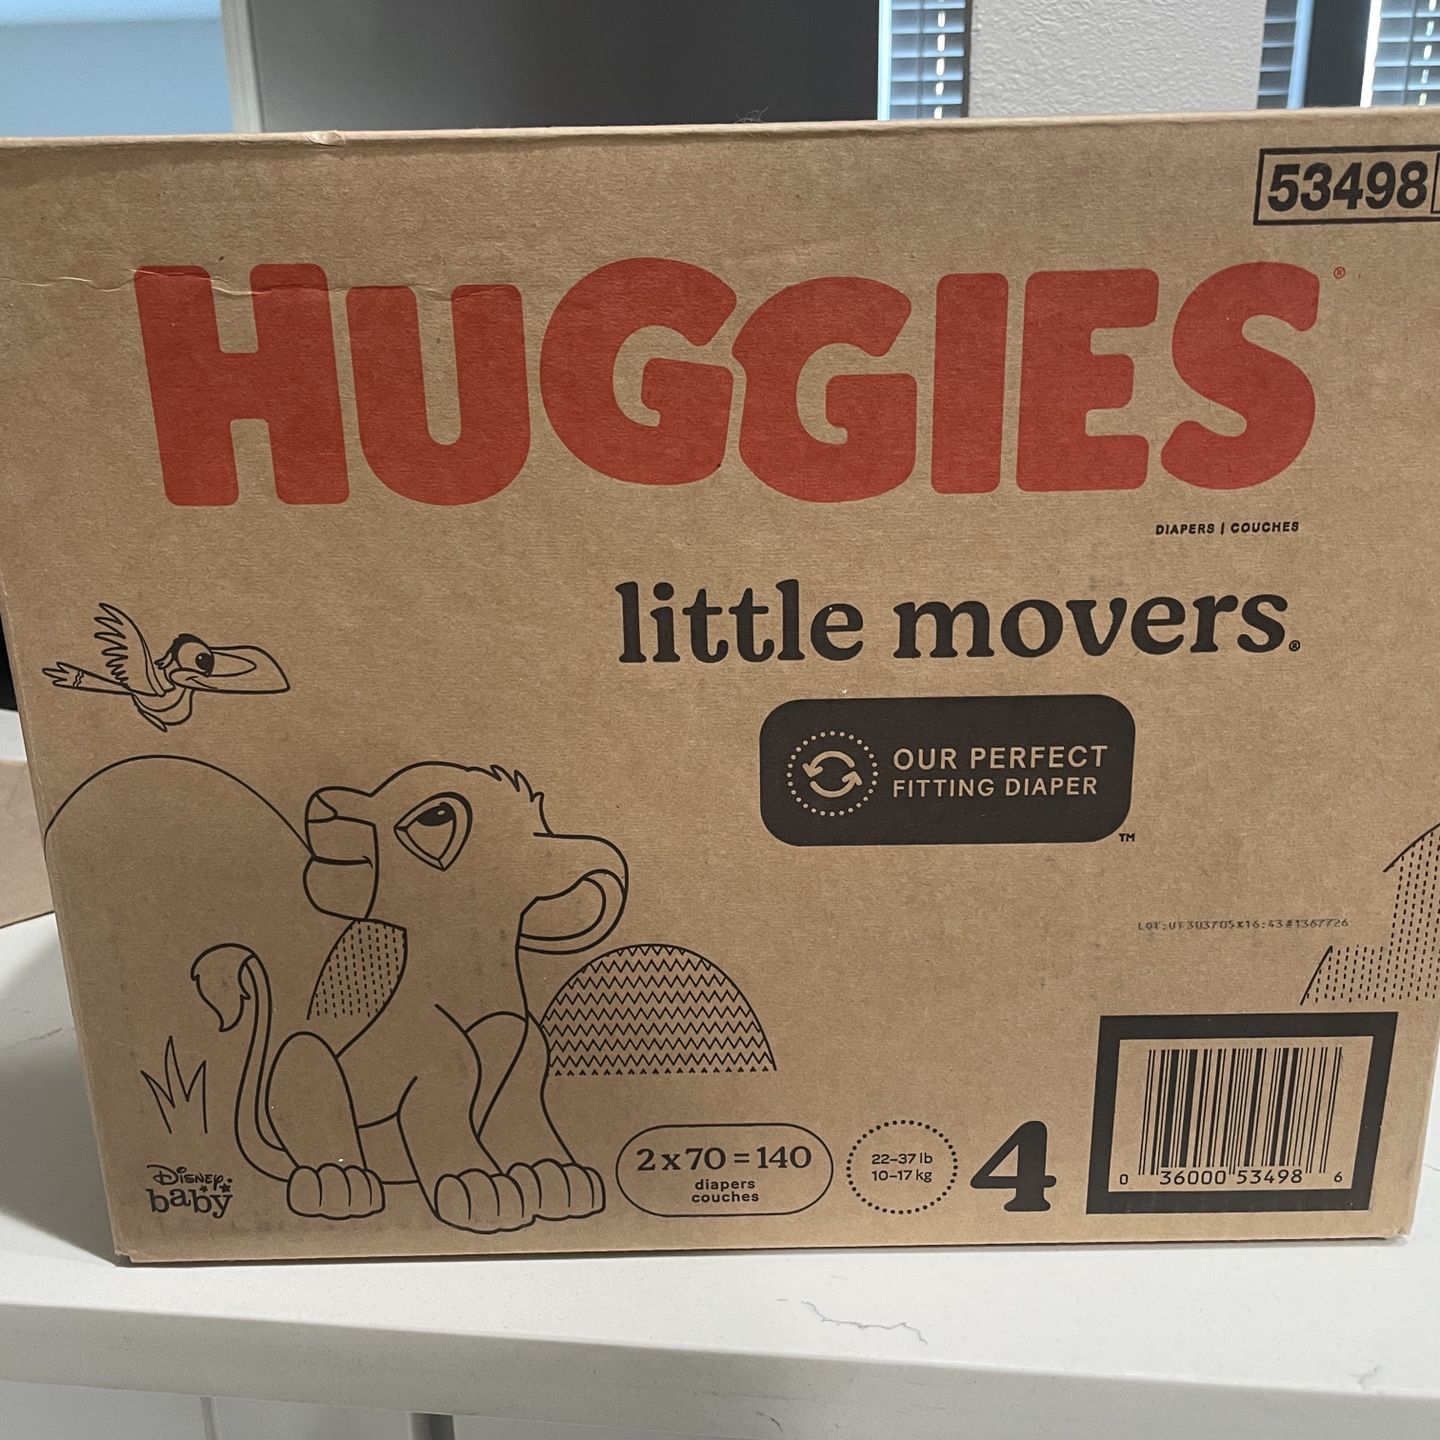 Huggies Little Movers Lion King for Sale in City Of Industry, CA - OfferUp